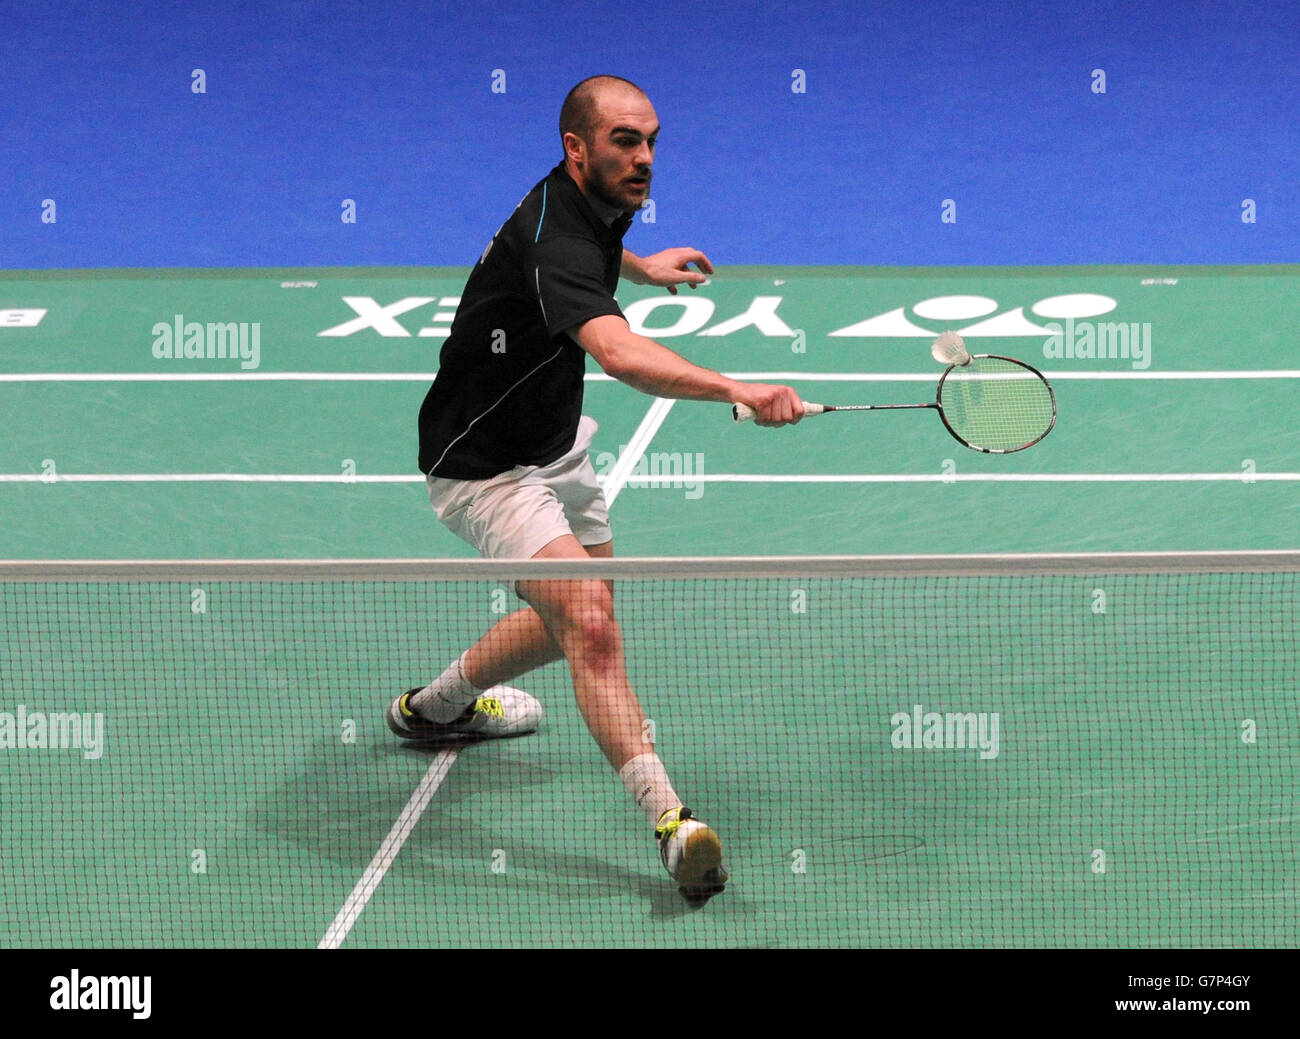 Ireland's Scott Evans plays a shot during day two of the 2015 Yonex All England Badminton Championships at the Barclaycard Arena, Birmingham. Stock Photo